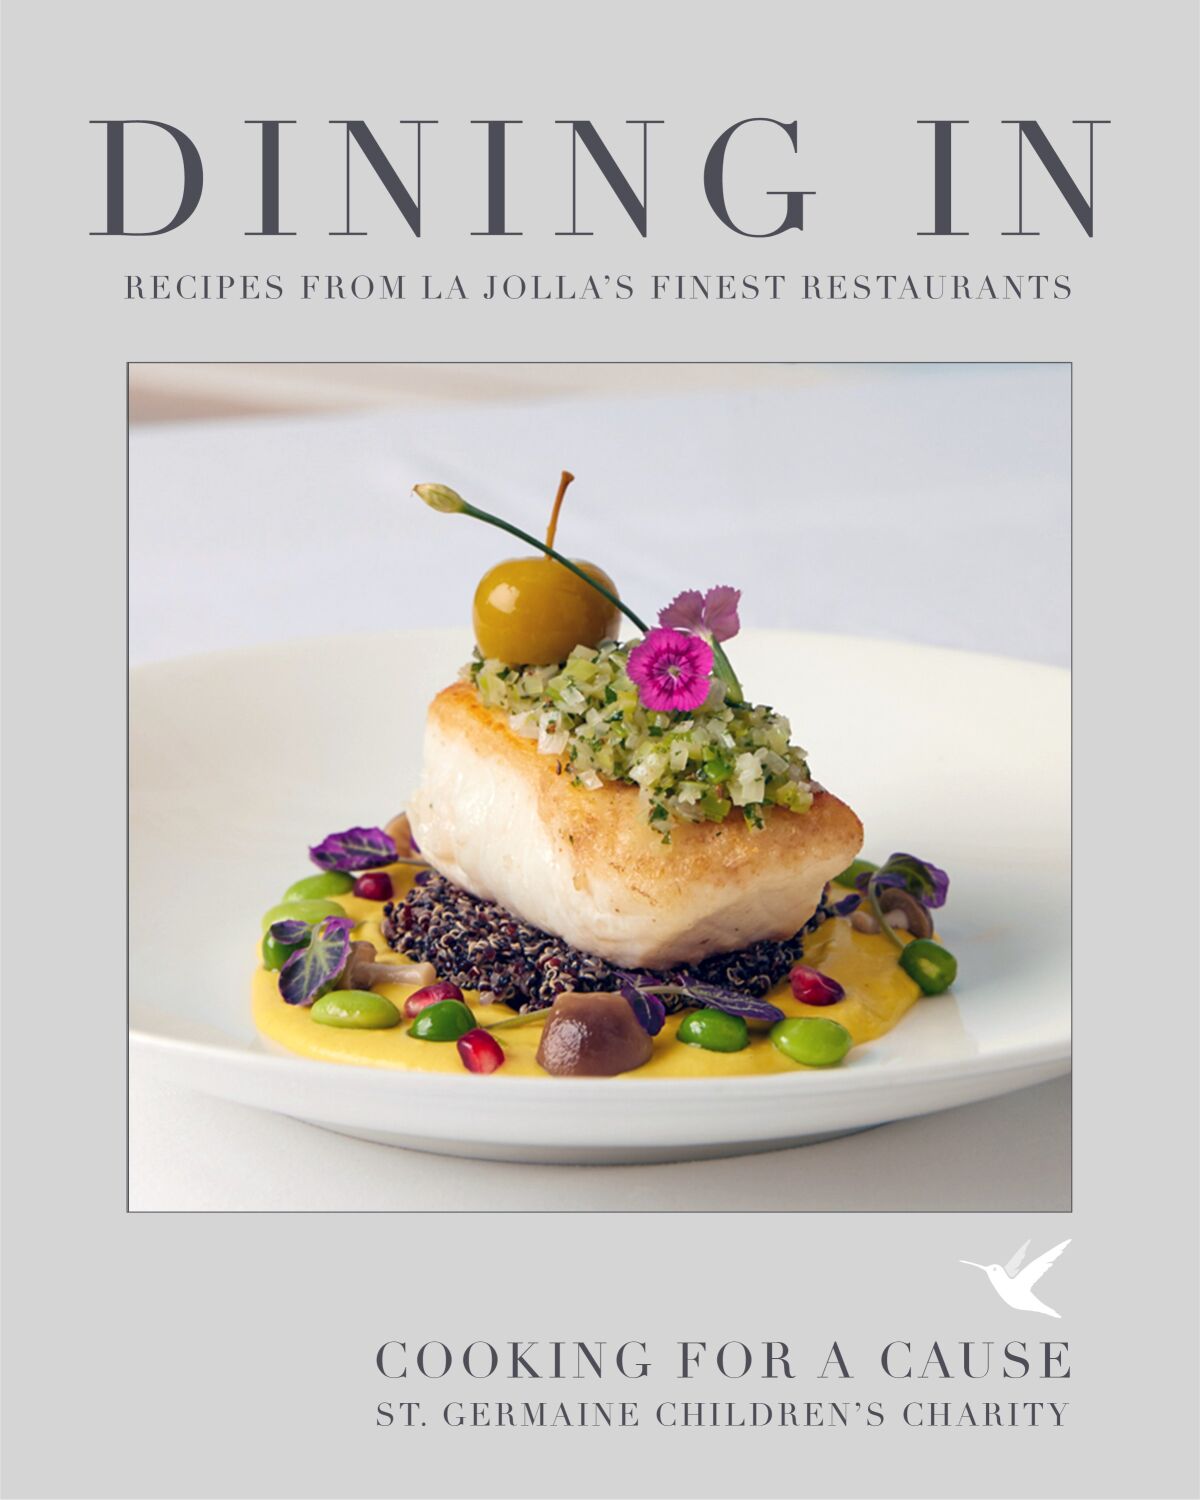 "Dining In" contains more than 50 recipes created and donated by chefs from over 40 La Jolla restaurants.